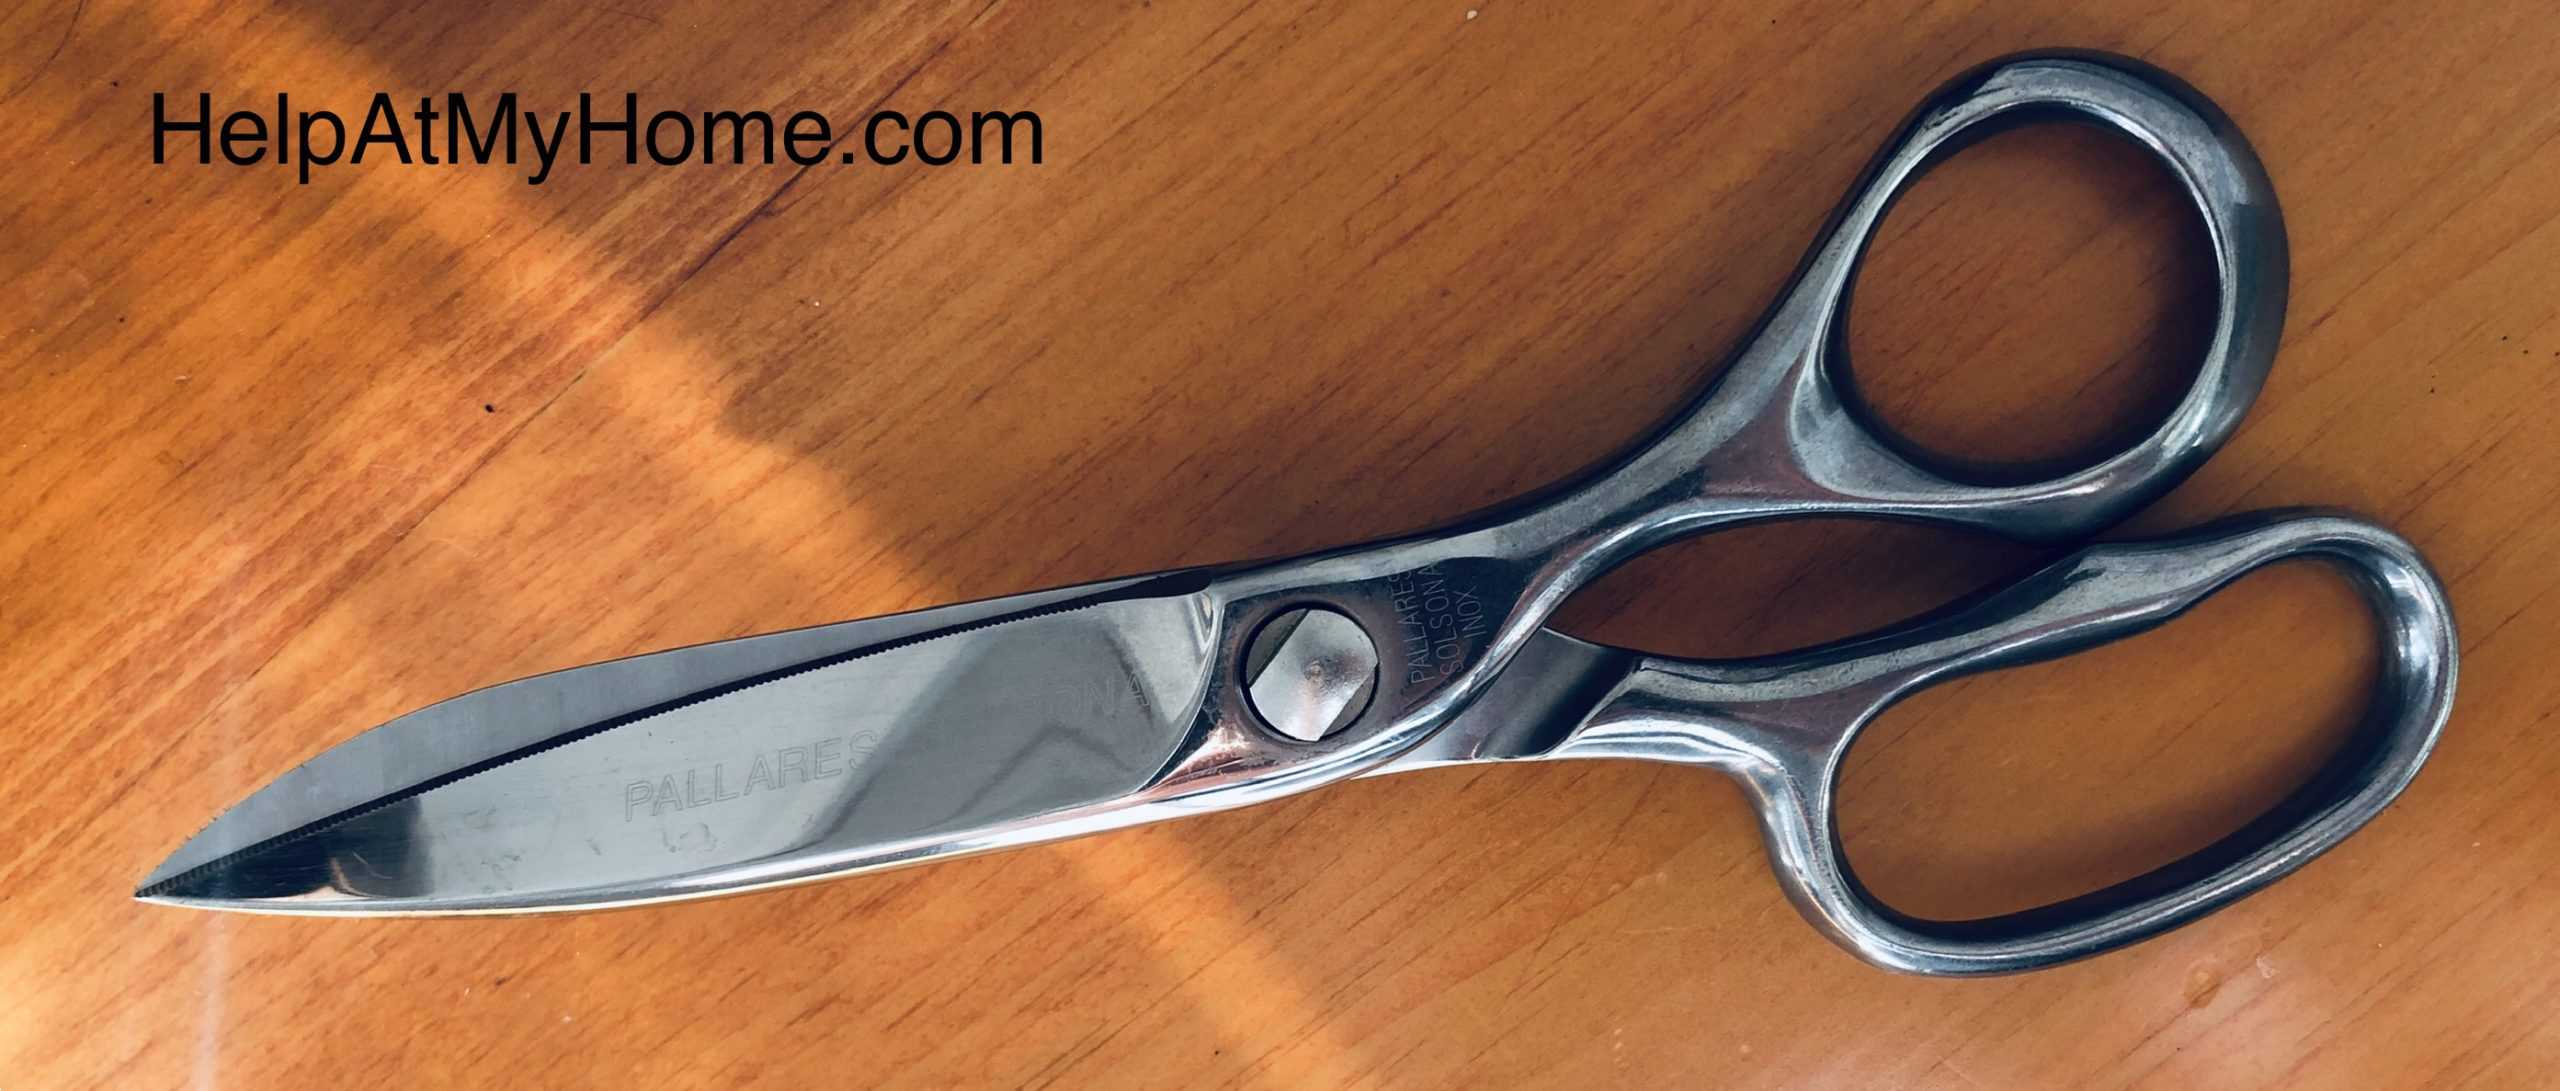 These are the best scissors I've ever owned - Curbed